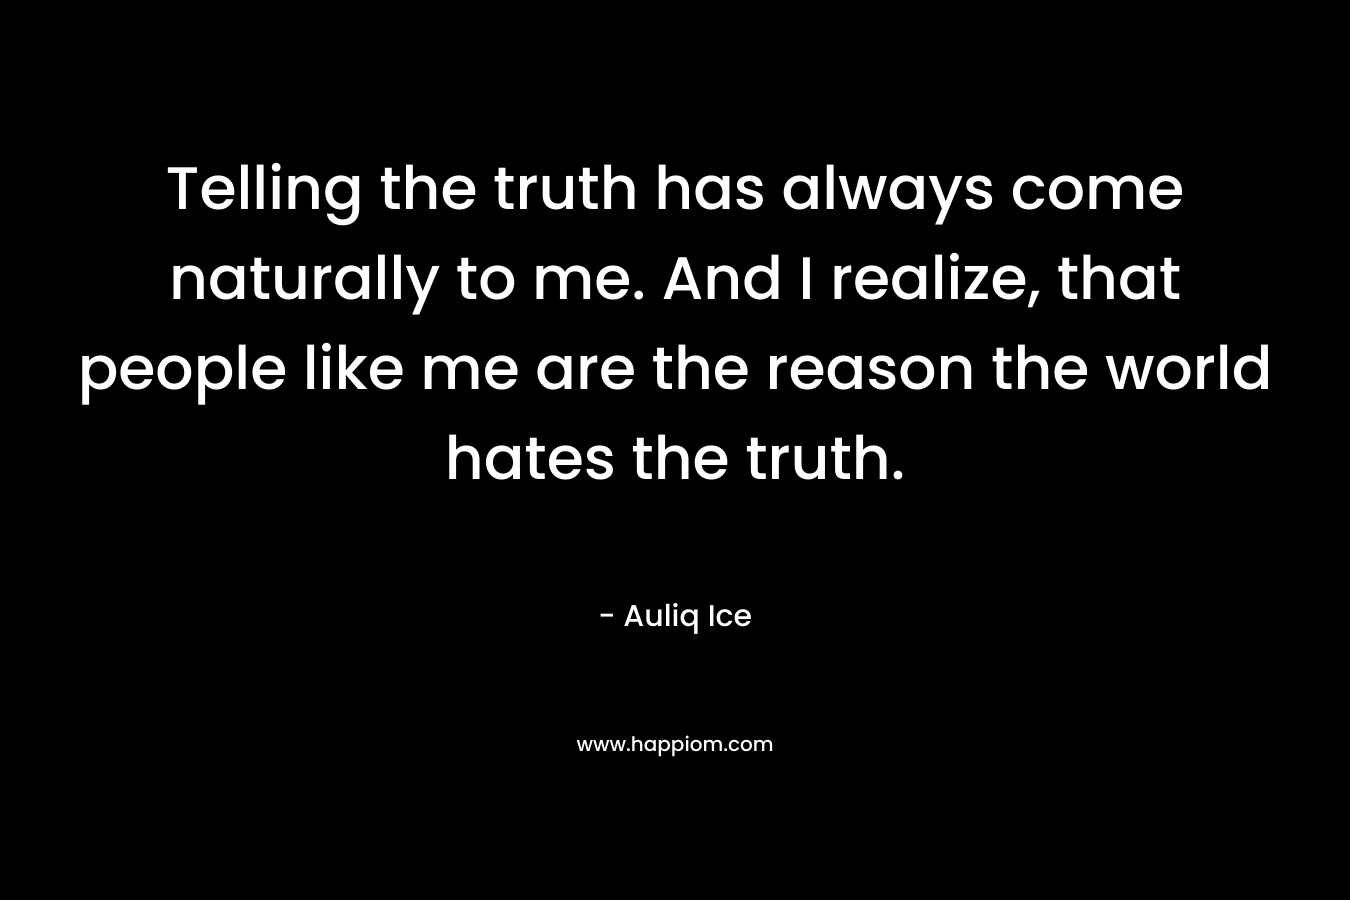 Telling the truth has always come naturally to me. And I realize, that people like me are the reason the world hates the truth. – Auliq Ice